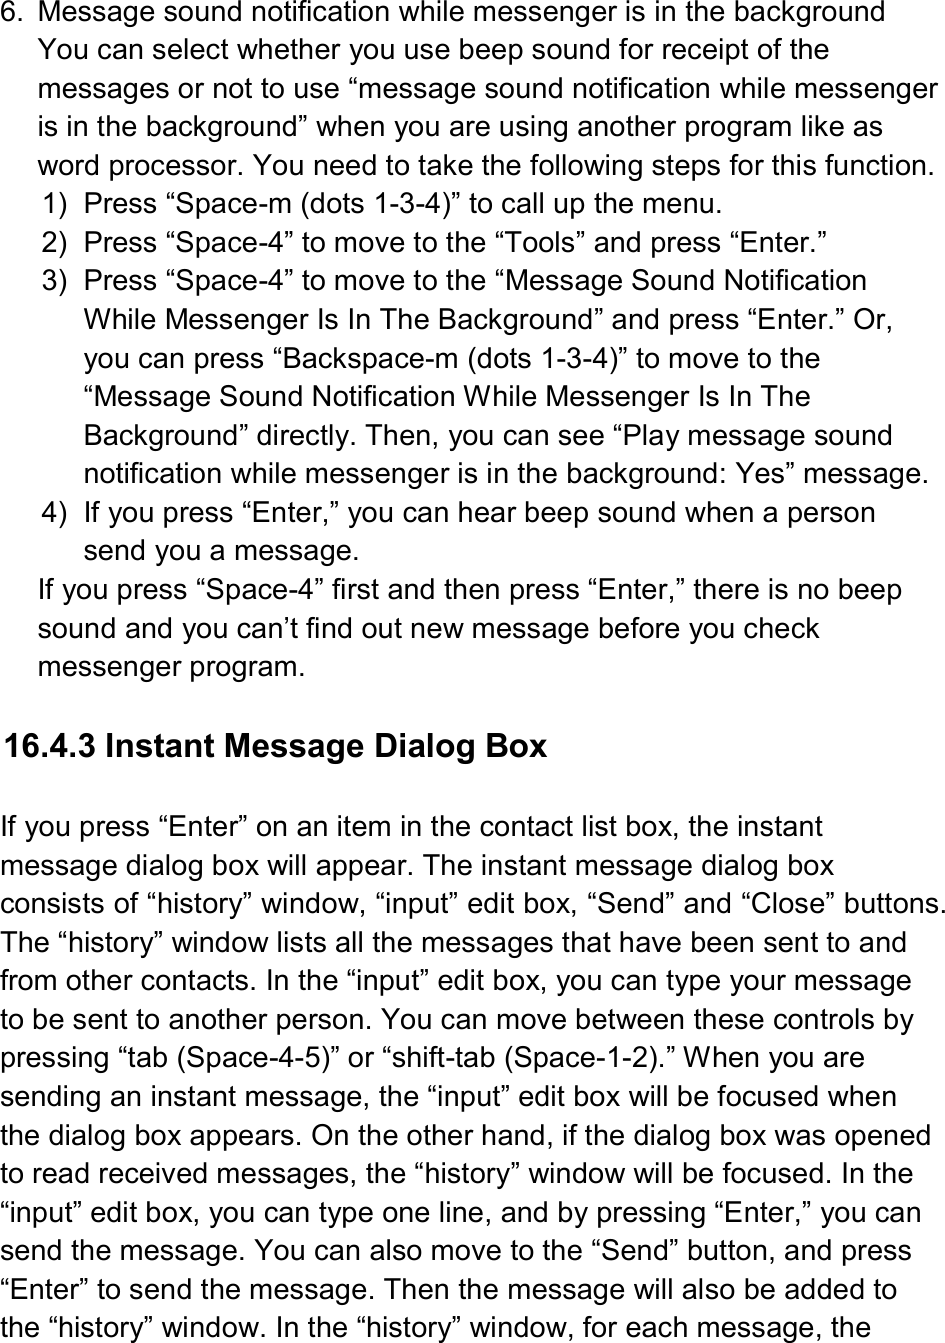   6.  Message sound notification while messenger is in the background You can select whether you use beep sound for receipt of the messages or not to use “message sound notification while messenger is in the background” when you are using another program like as word processor. You need to take the following steps for this function. 1)  Press “Space-m (dots 1-3-4)” to call up the menu. 2)  Press “Space-4” to move to the “Tools” and press “Enter.” 3)  Press “Space-4” to move to the “Message Sound Notification While Messenger Is In The Background” and press “Enter.” Or, you can press “Backspace-m (dots 1-3-4)” to move to the “Message Sound Notification While Messenger Is In The Background” directly. Then, you can see “Play message sound notification while messenger is in the background: Yes” message. 4)  If you press “Enter,” you can hear beep sound when a person send you a message. If you press “Space-4” first and then press “Enter,” there is no beep sound and you can’t find out new message before you check messenger program.  16.4.3 Instant Message Dialog Box  If you press “Enter” on an item in the contact list box, the instant message dialog box will appear. The instant message dialog box consists of “history” window, “input” edit box, “Send” and “Close” buttons. The “history” window lists all the messages that have been sent to and from other contacts. In the “input” edit box, you can type your message to be sent to another person. You can move between these controls by pressing “tab (Space-4-5)” or “shift-tab (Space-1-2).” When you are sending an instant message, the “input” edit box will be focused when the dialog box appears. On the other hand, if the dialog box was opened to read received messages, the “history” window will be focused. In the “input” edit box, you can type one line, and by pressing “Enter,” you can send the message. You can also move to the “Send” button, and press “Enter” to send the message. Then the message will also be added to the “history” window. In the “history” window, for each message, the 